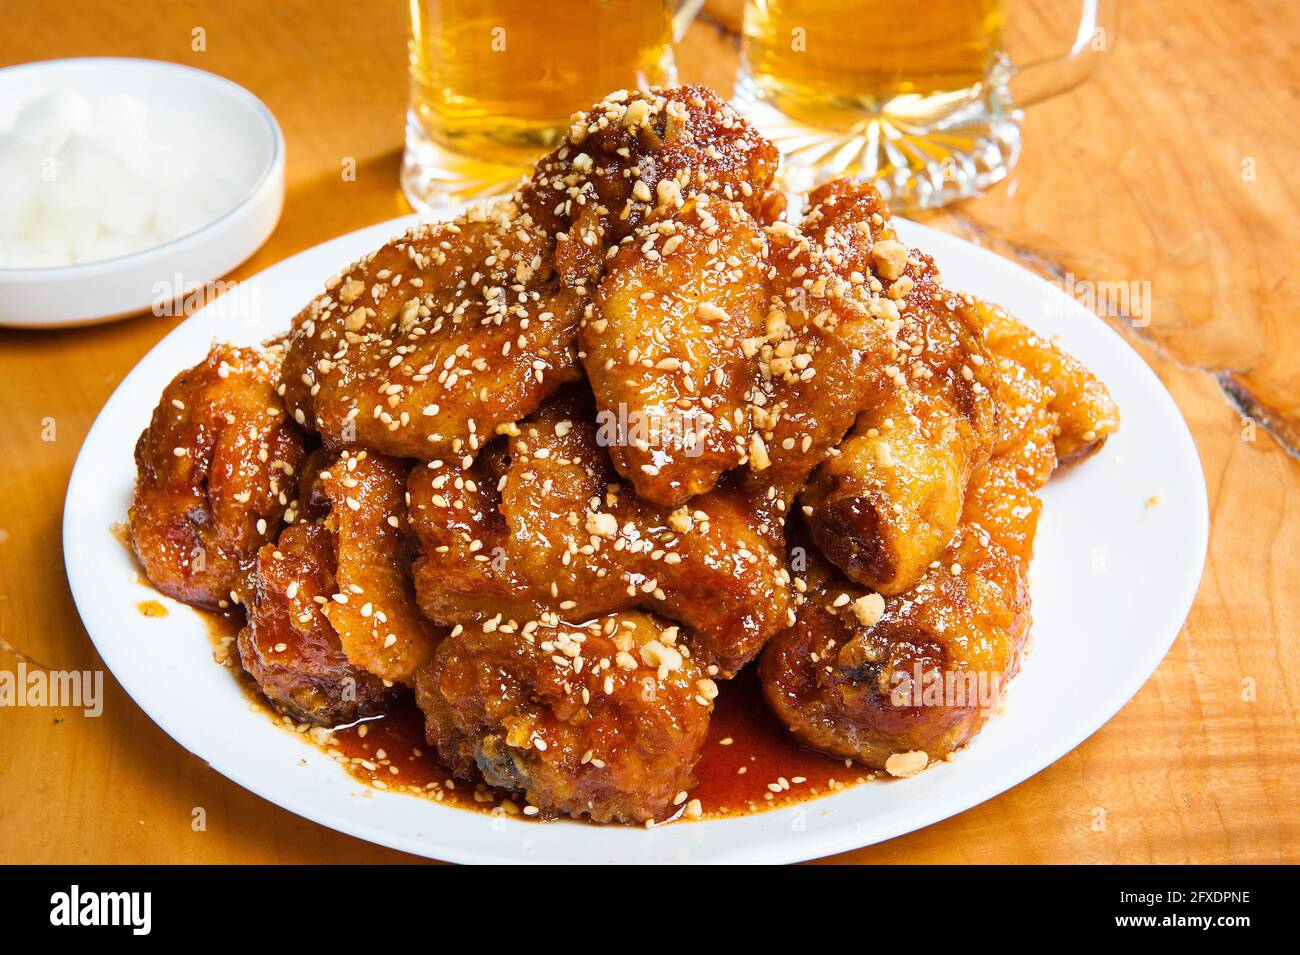 Korean spicy chicken wings with glasses of beer. Stock Photo